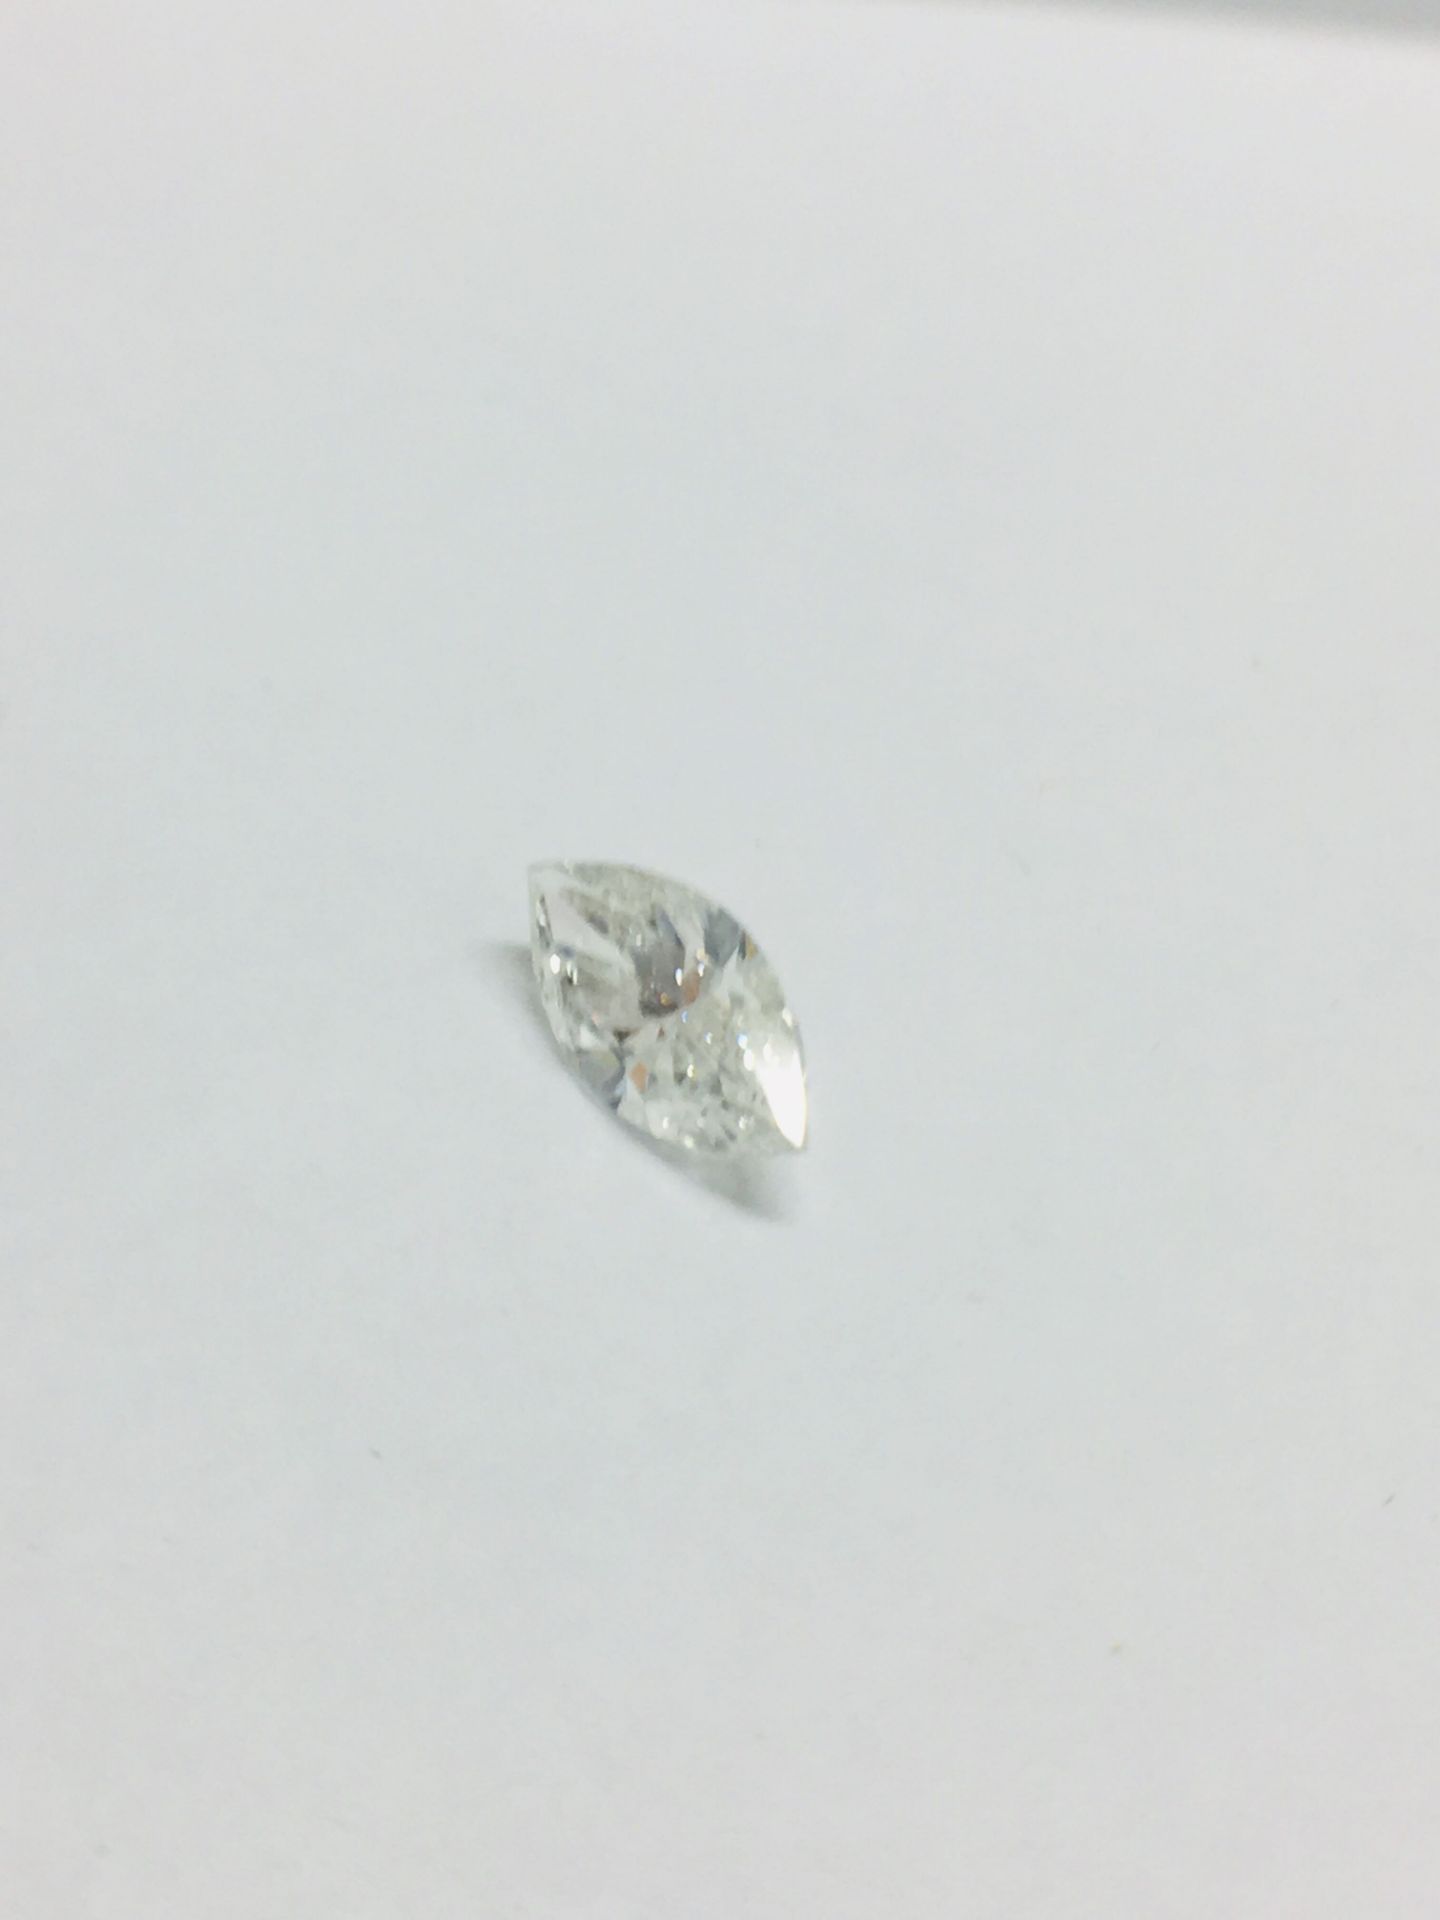 1.23ct Marquis Cut Natural Diamond - Image 2 of 5